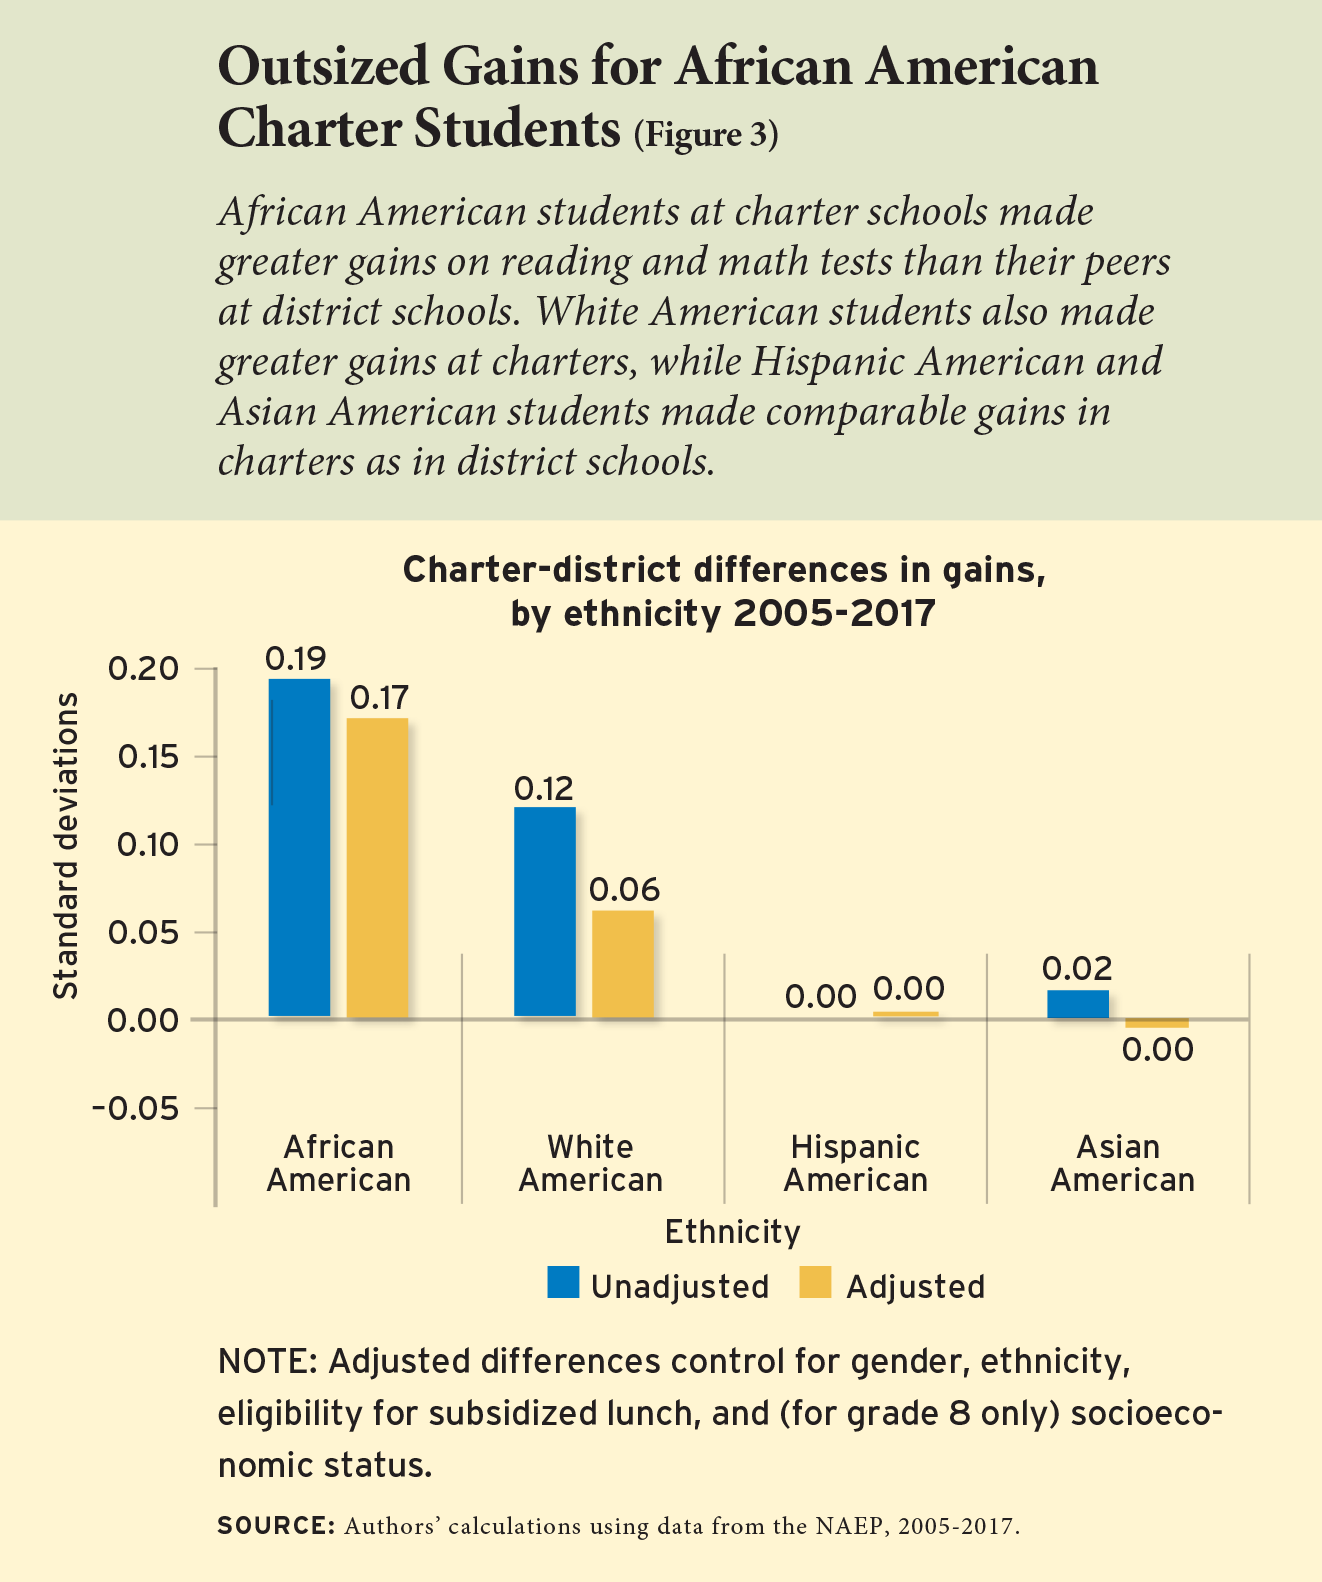 Figure 3 - Outsized Gains for African American Charter Students 